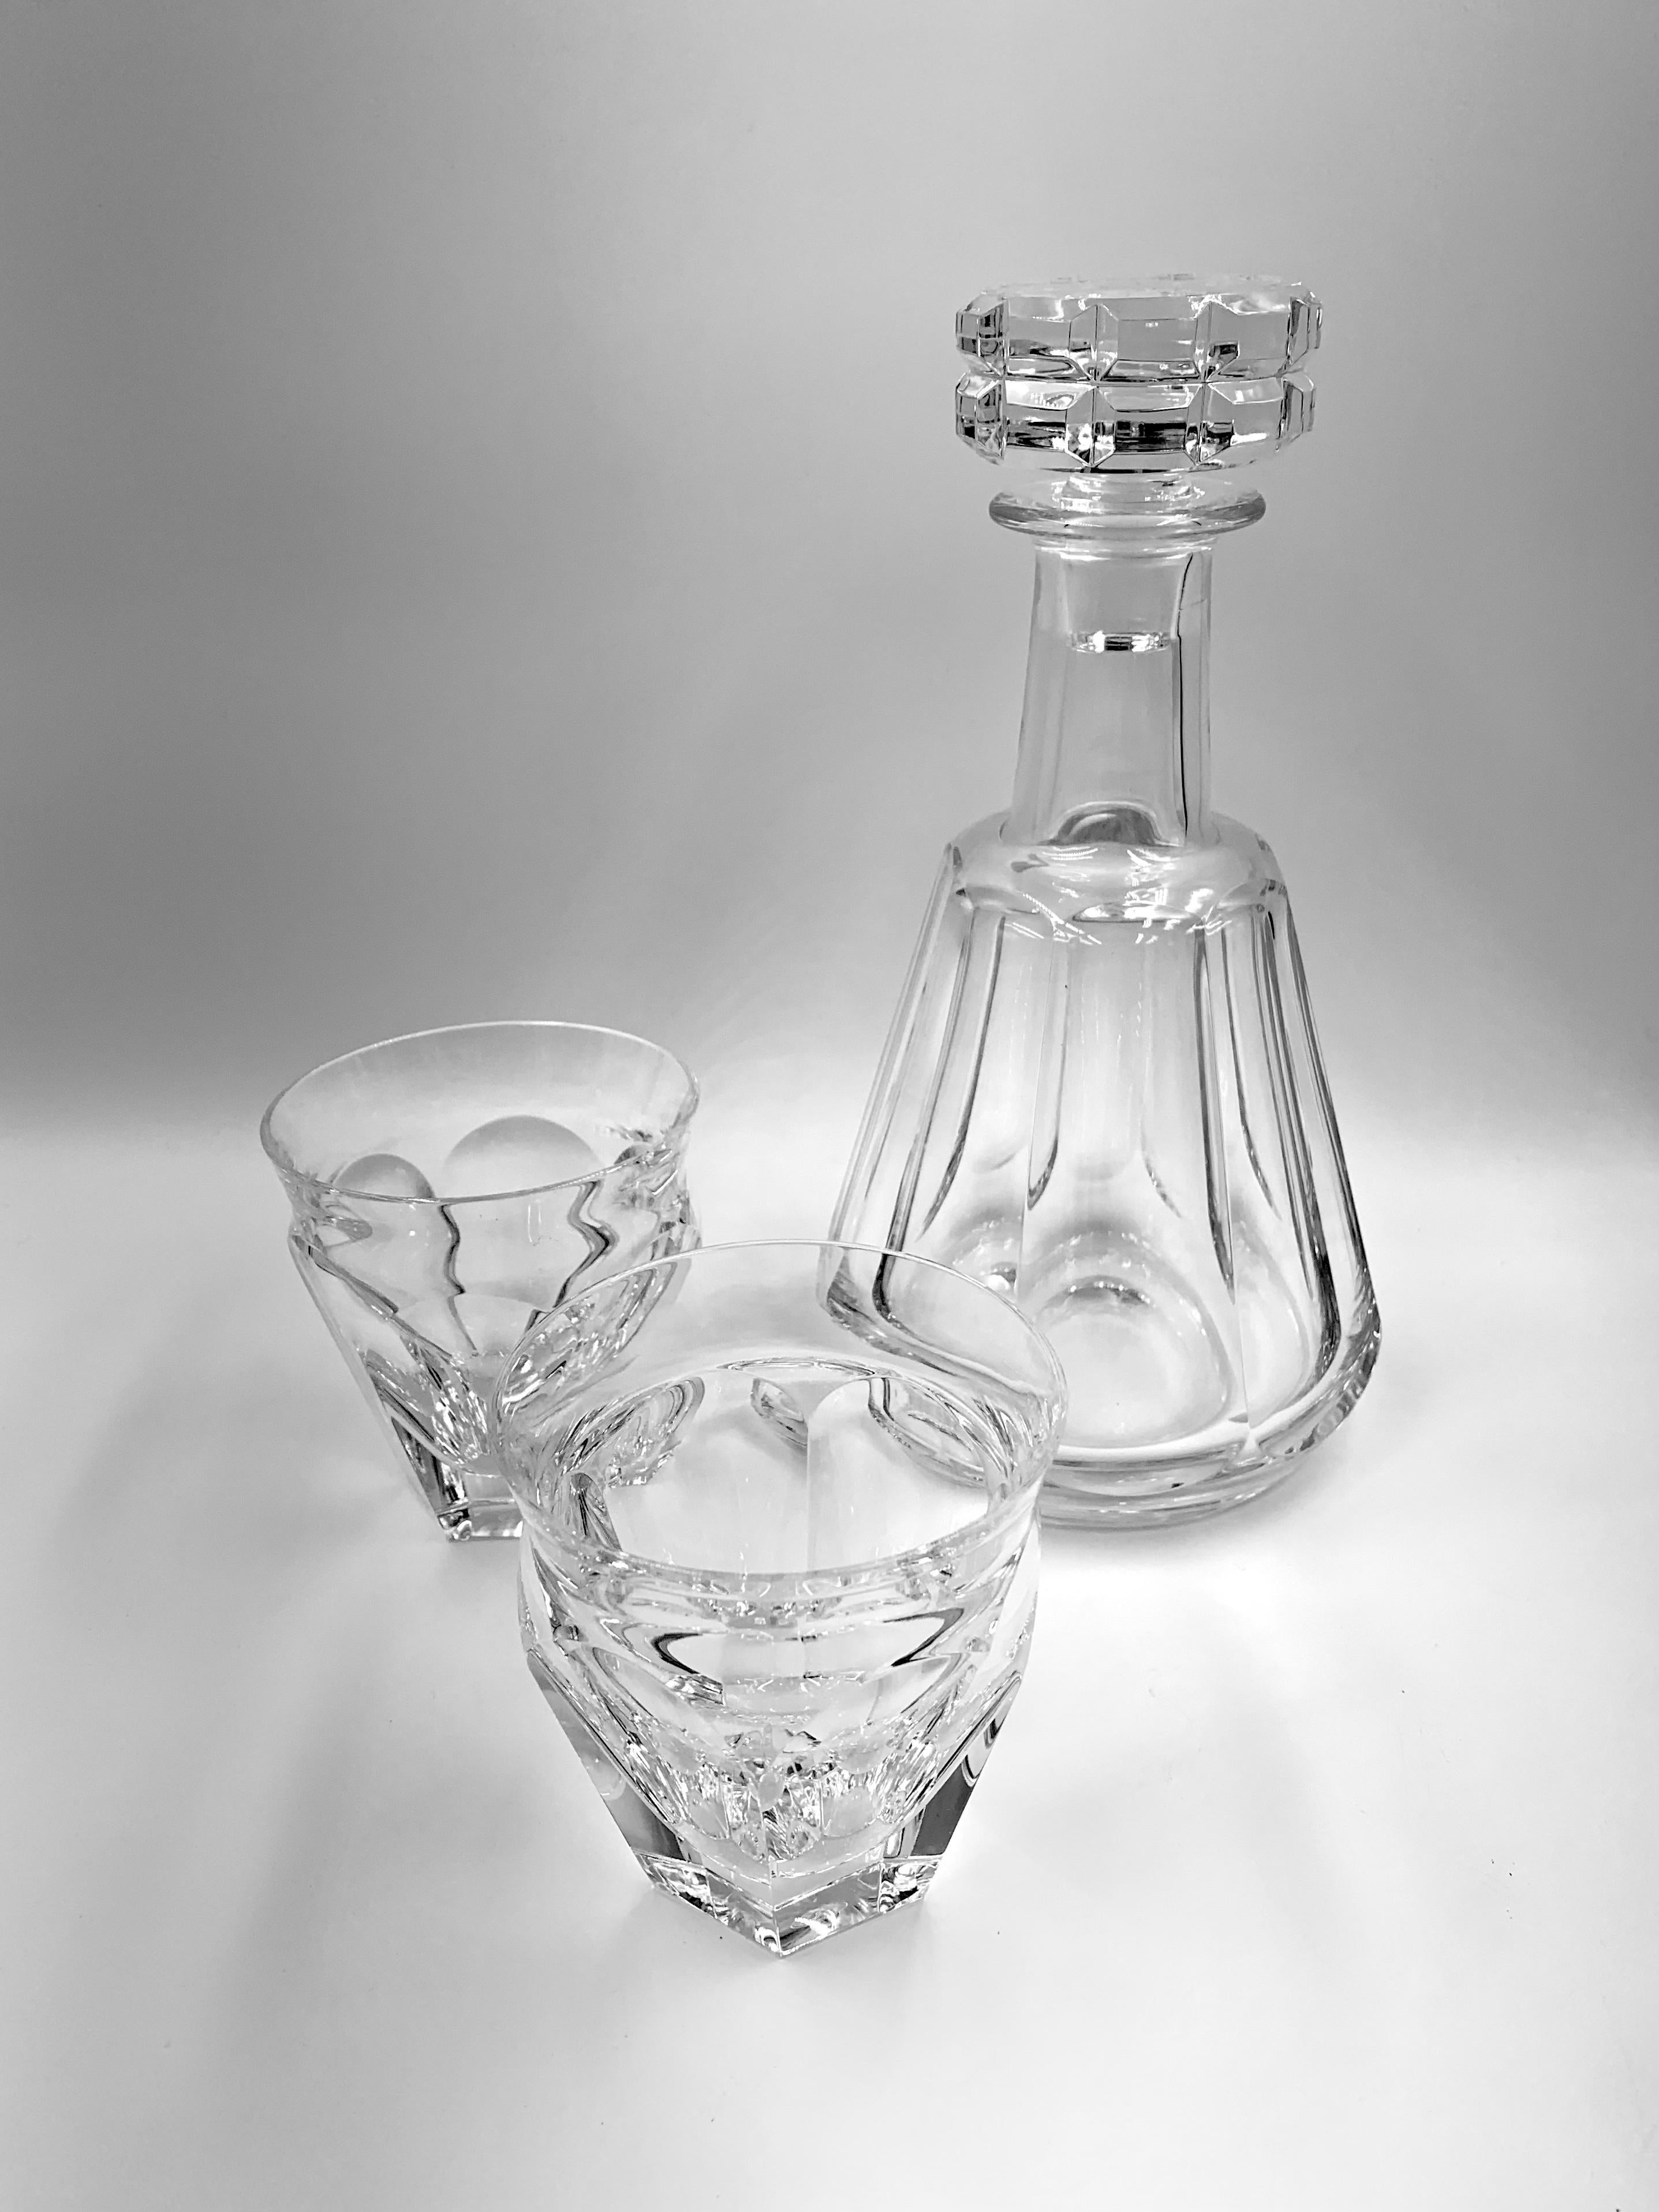 Beautiful estate Baccarat crystal whiskey/spirits decanter in the Harcourt Talleyrand pattern.
Signed on base
Excellent condition.
    